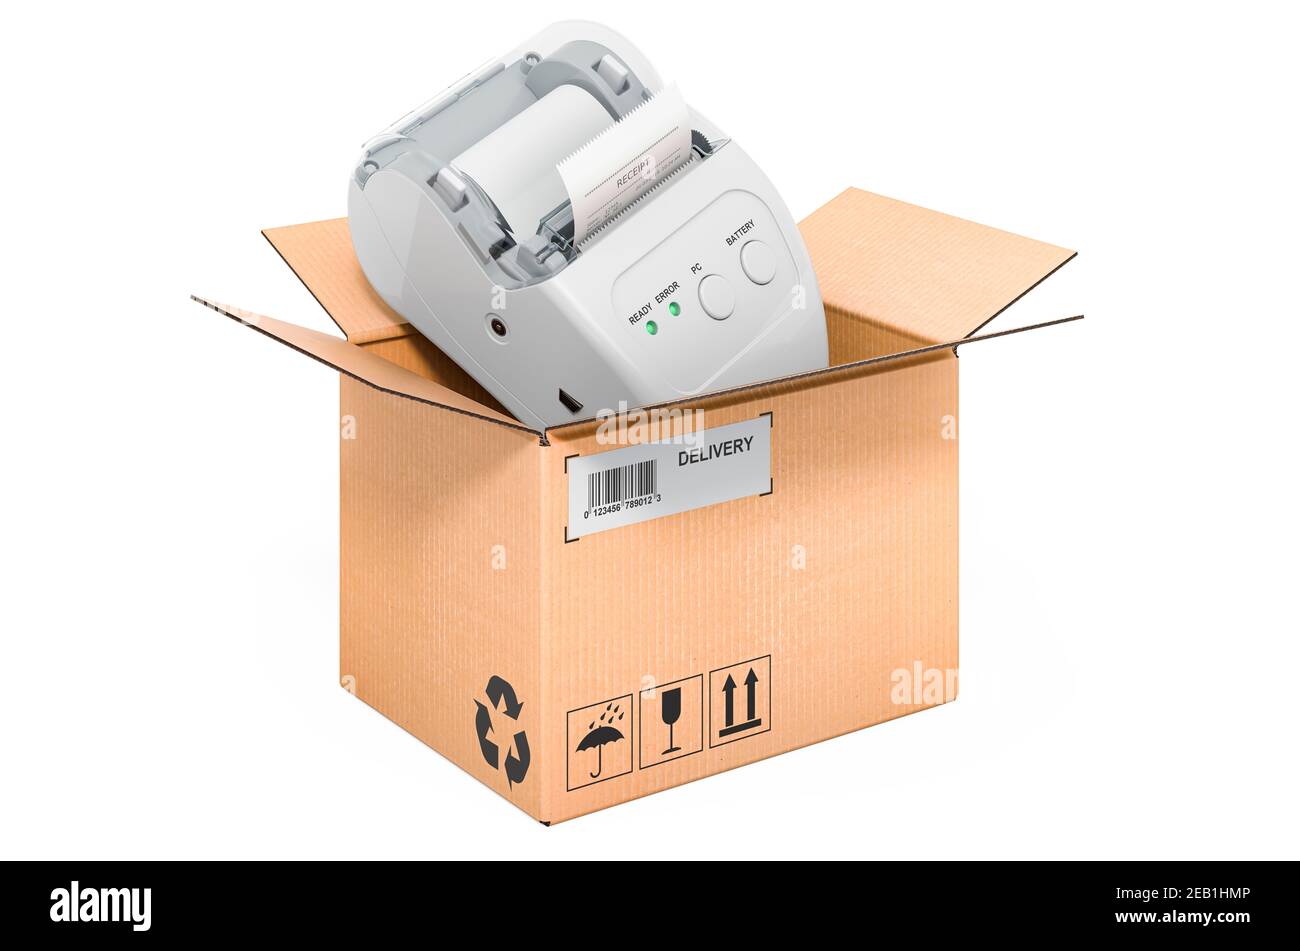 Receipt printer inside cardboard box, delivery concept. 3D rendering isolated on white background Stock Photo